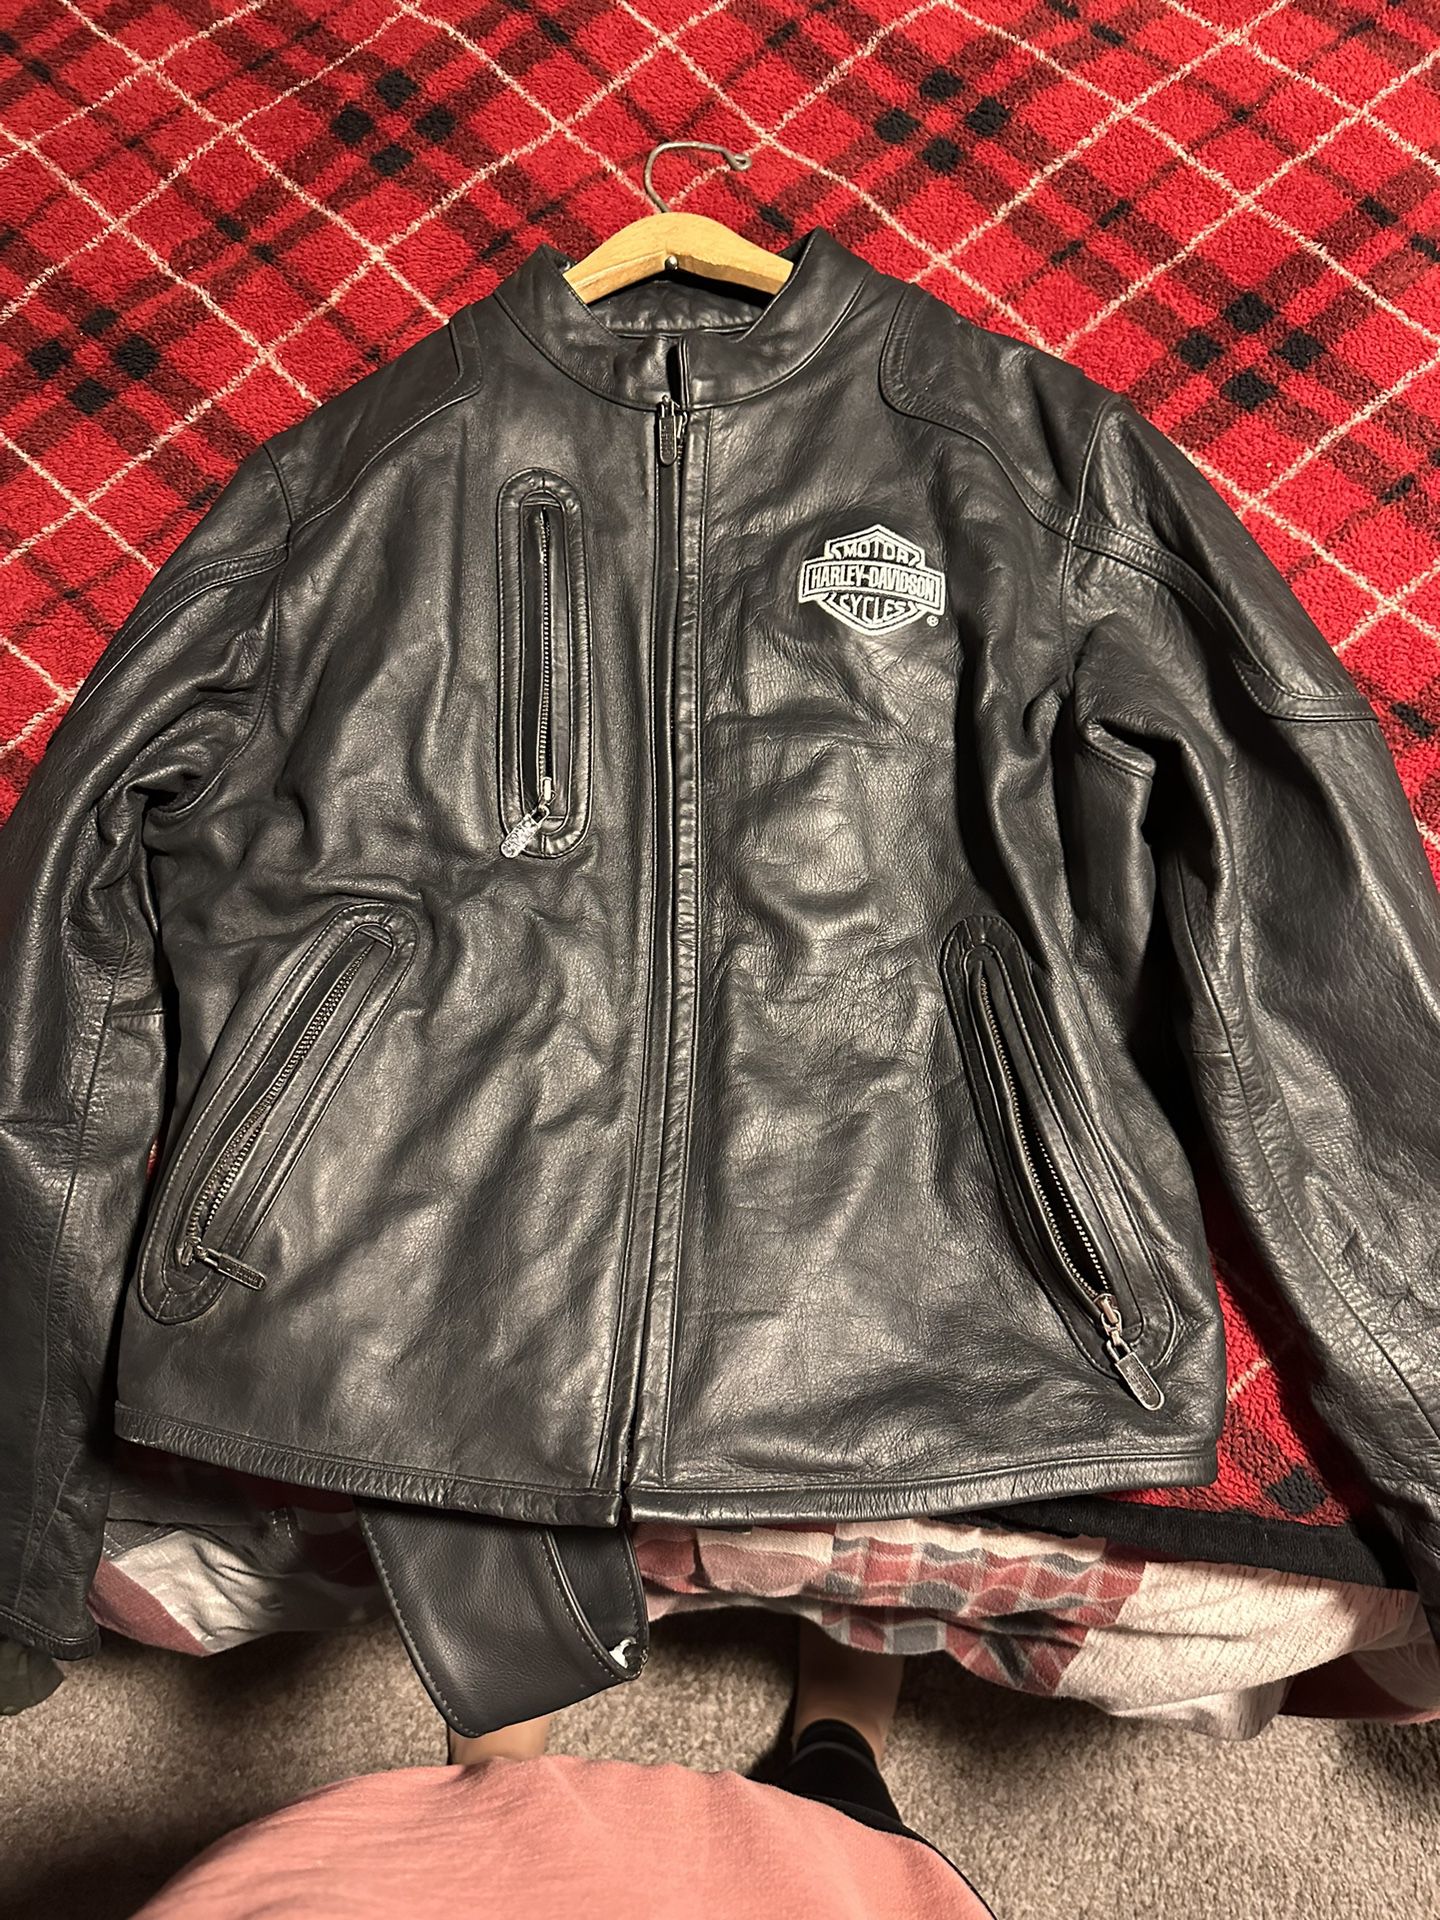 Harley Davidson Leather Jacket and Chaps